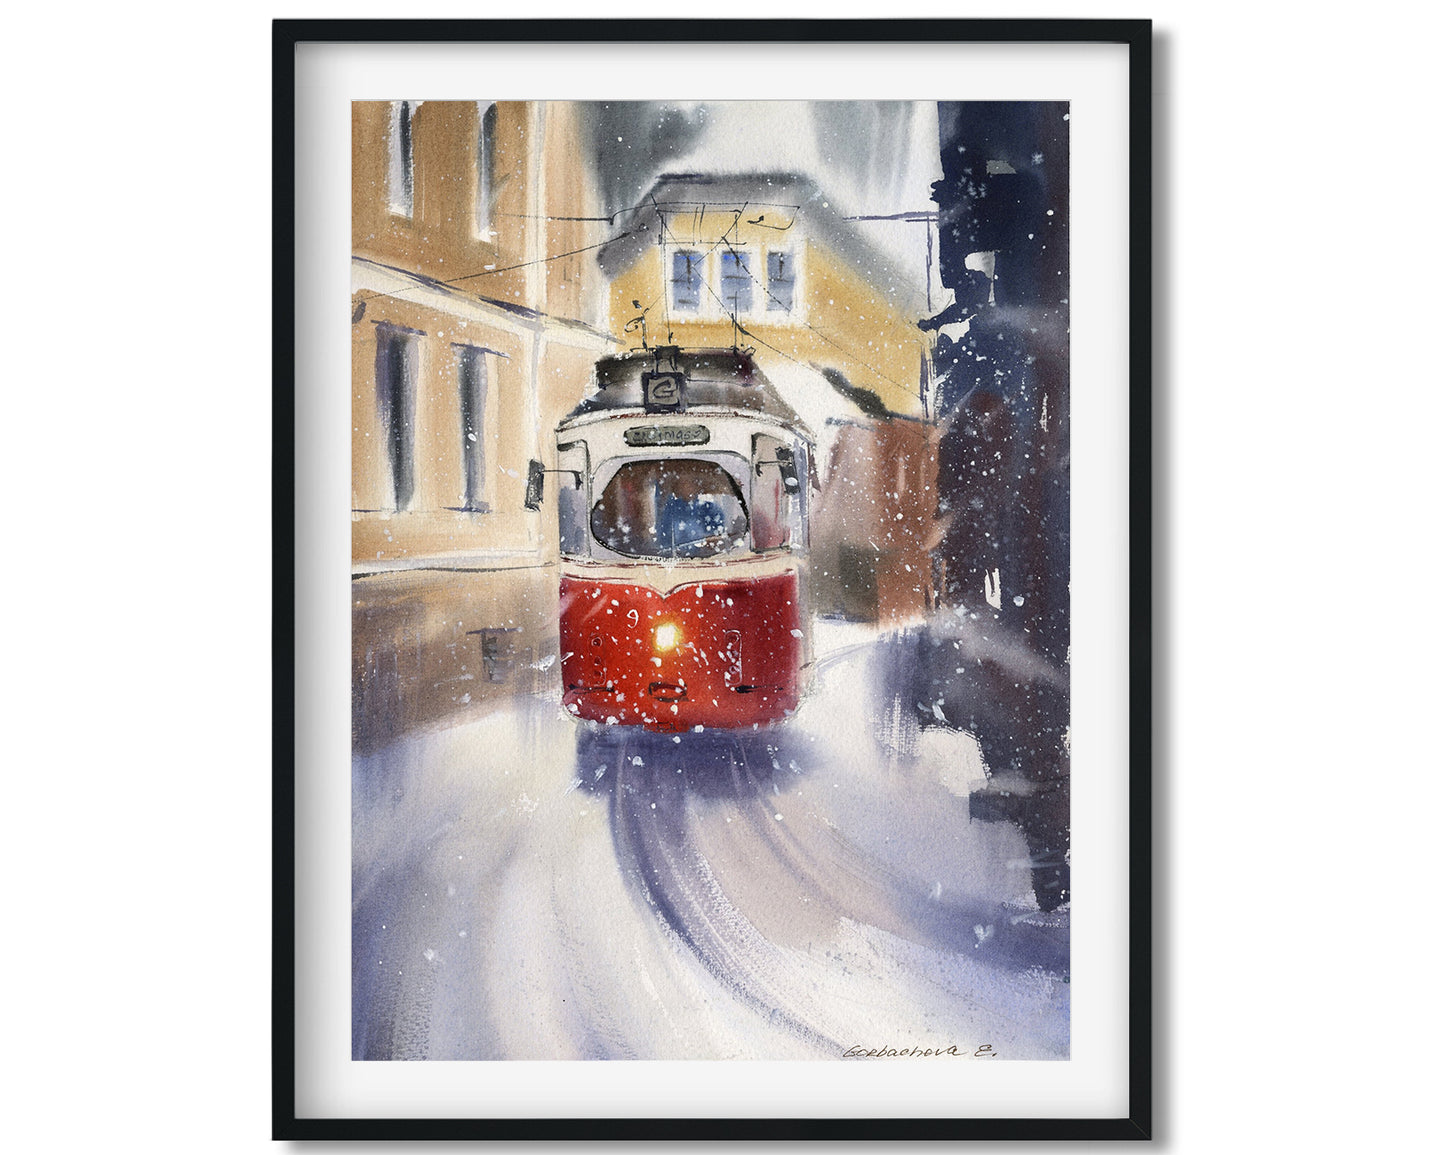 Tram Painting, Small Watercolor Original, Winter Cityscape, Snowy Prague City, Happy New Year Gift